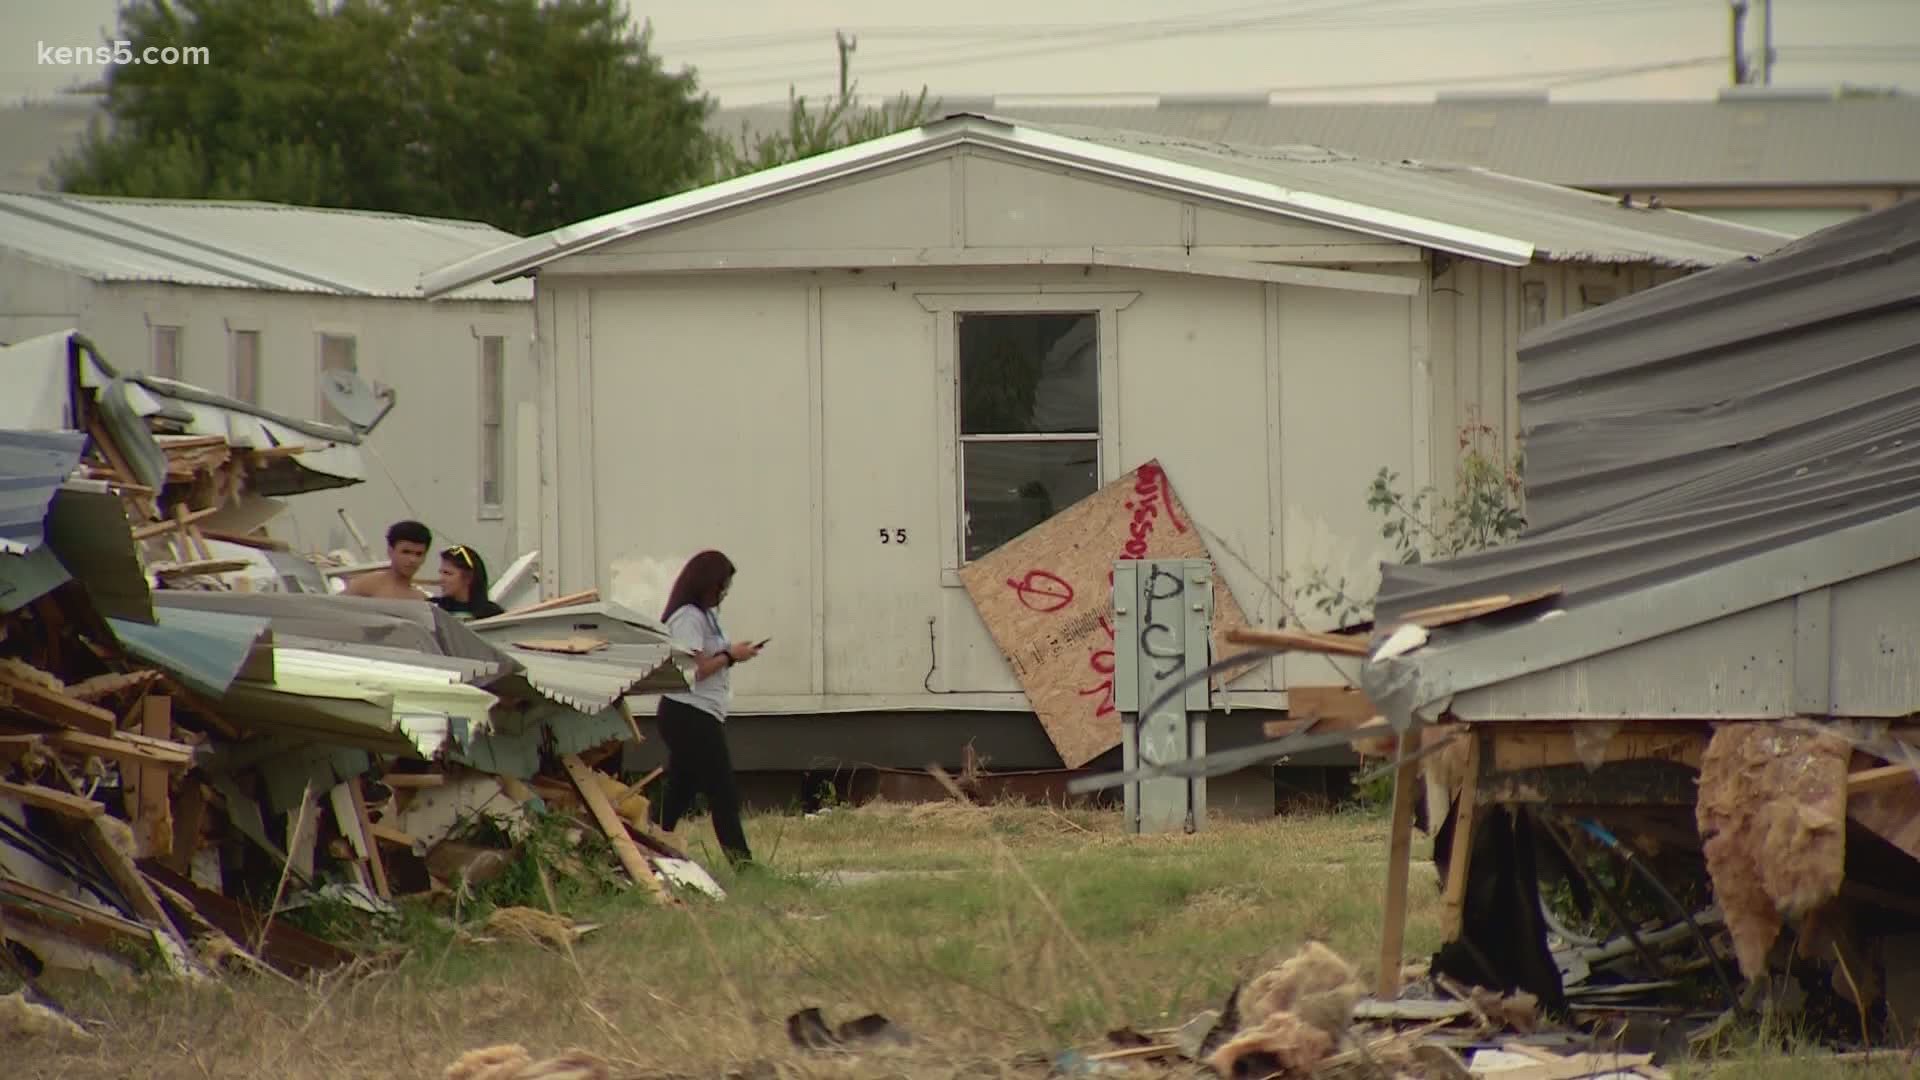 Jasper Park is full of dangerous living conditions and destroyed mobile homes. Bexar County set aside money to help people move out, but many residents didn't know.